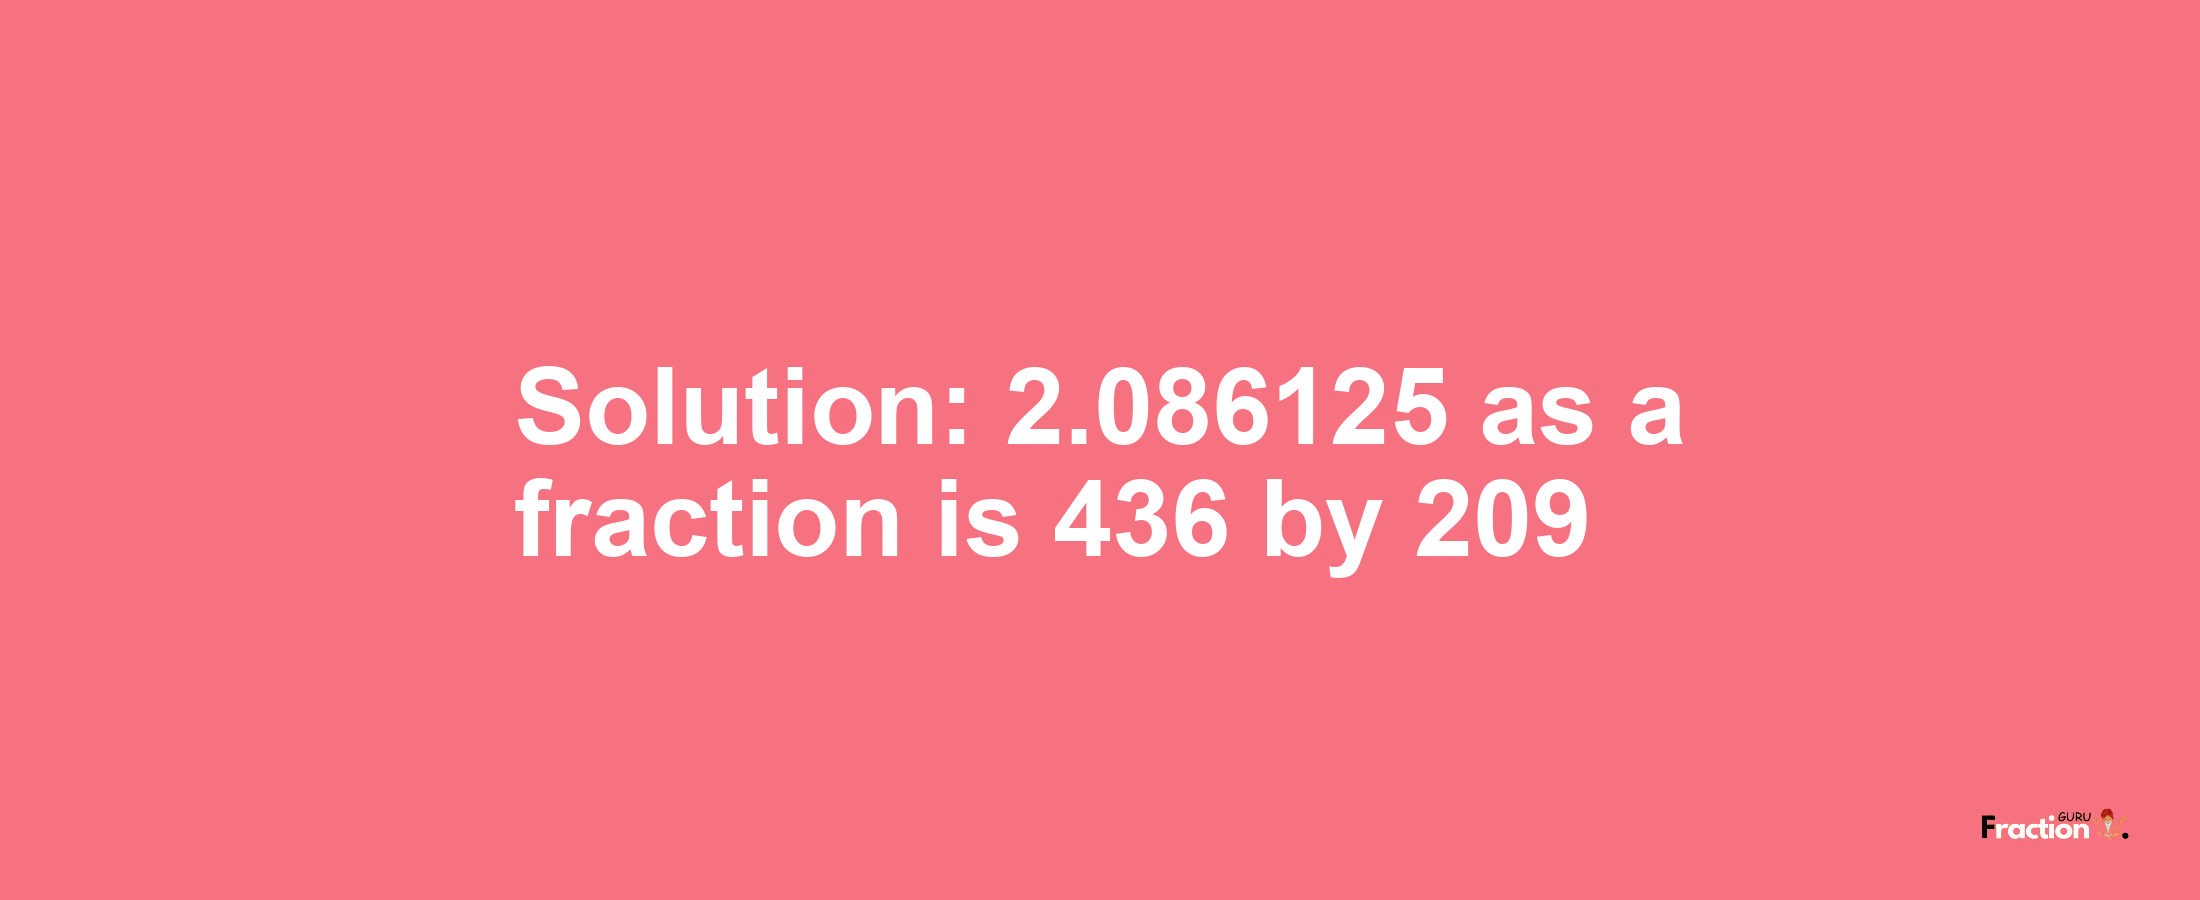 Solution:2.086125 as a fraction is 436/209